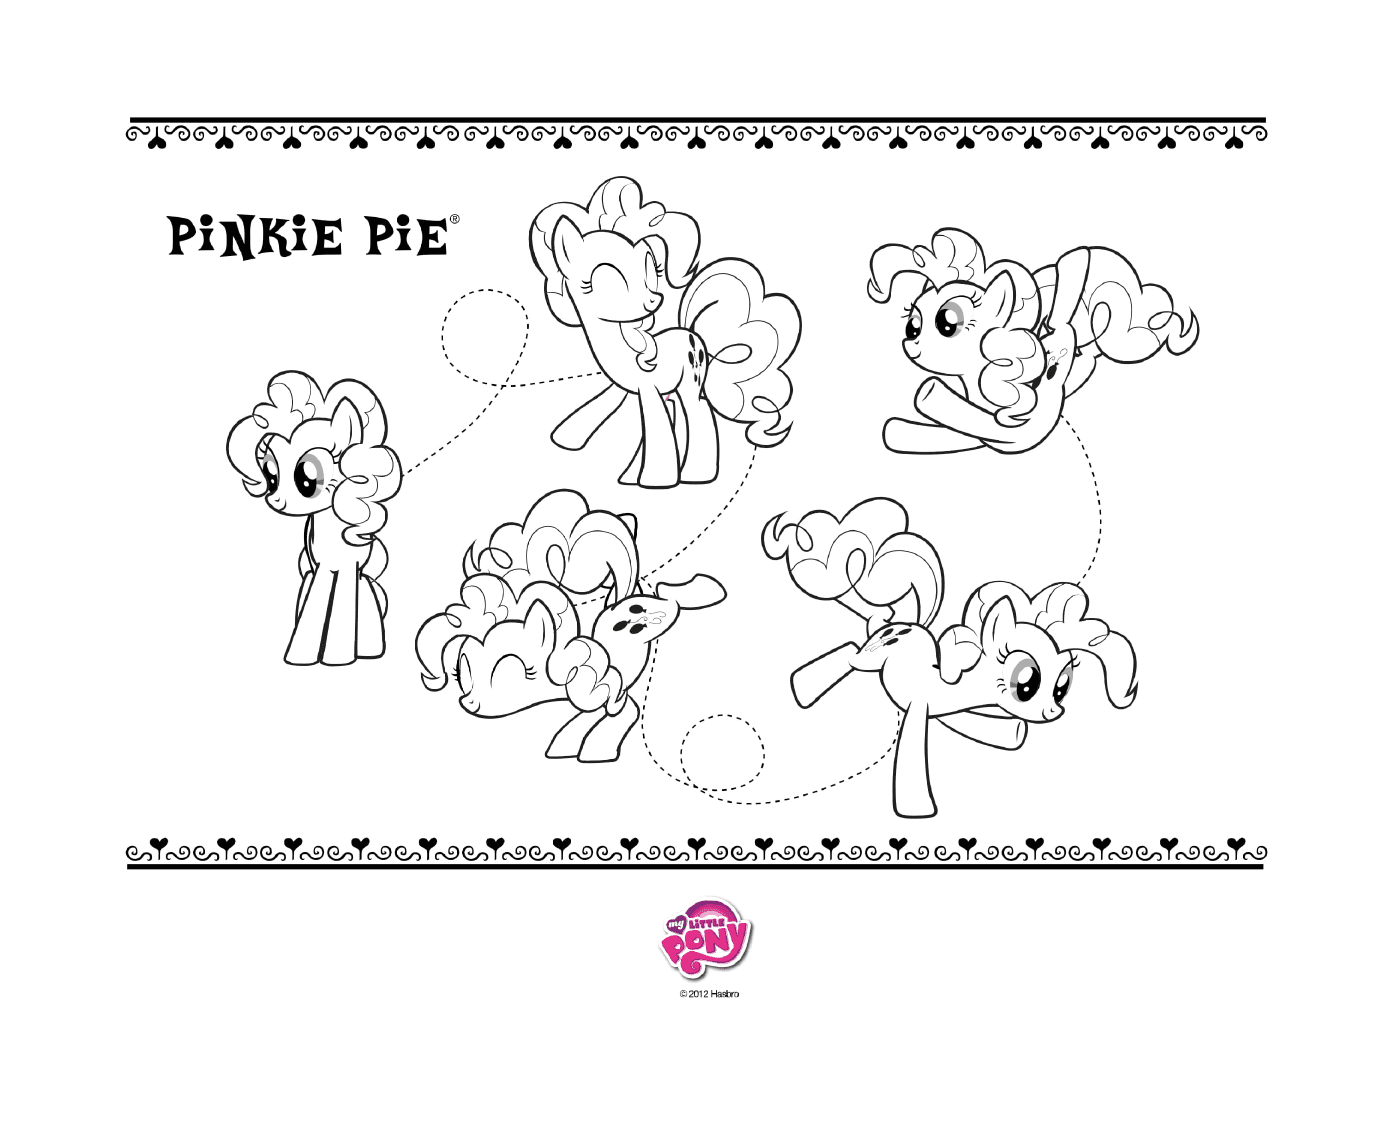  Pinkie Pie, happy and colorful 